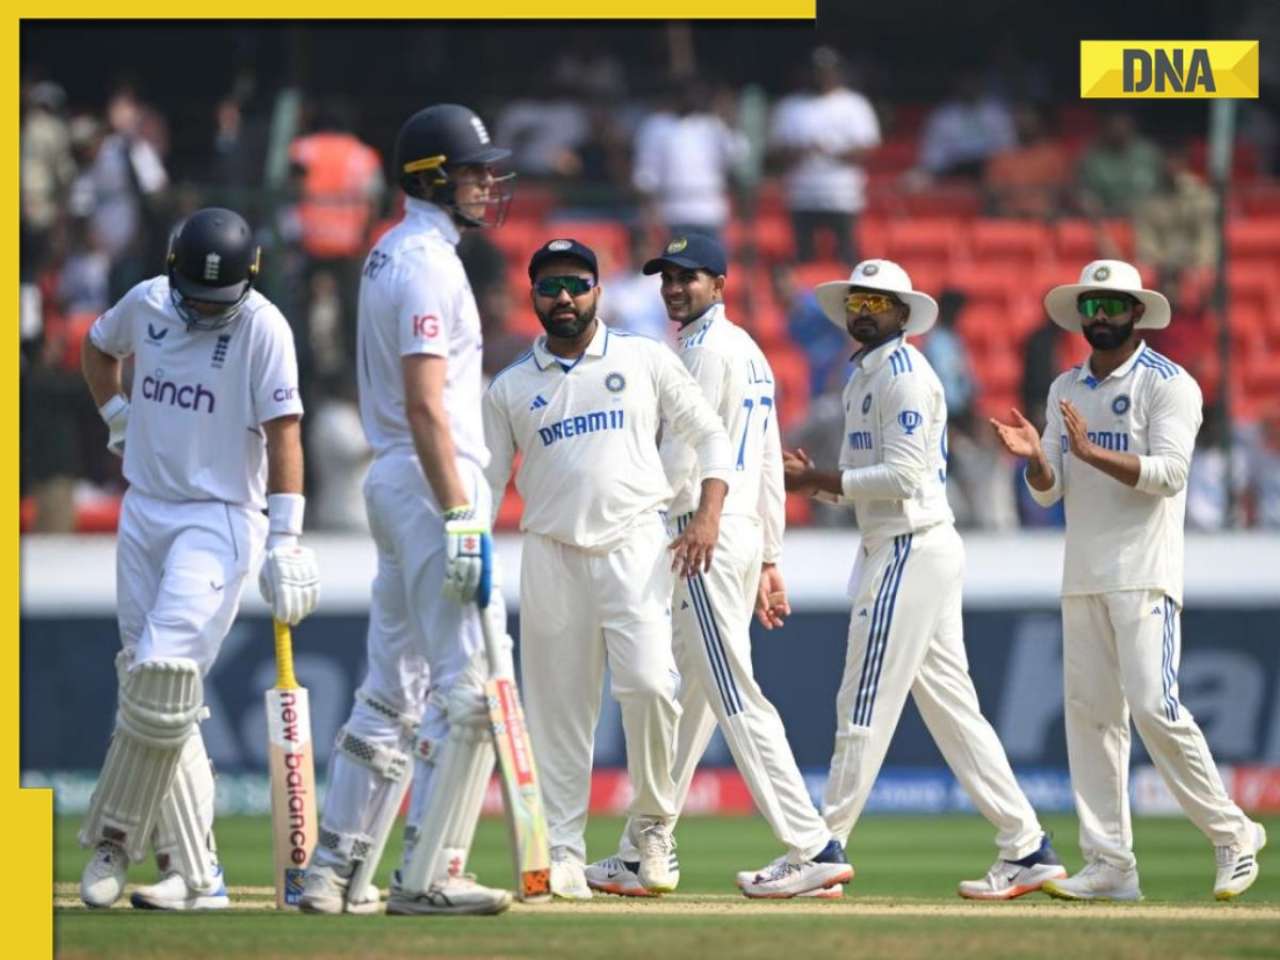 IND vs ENG, 5th Test Dream11 prediction: Fantasy cricket tips for India vs England match